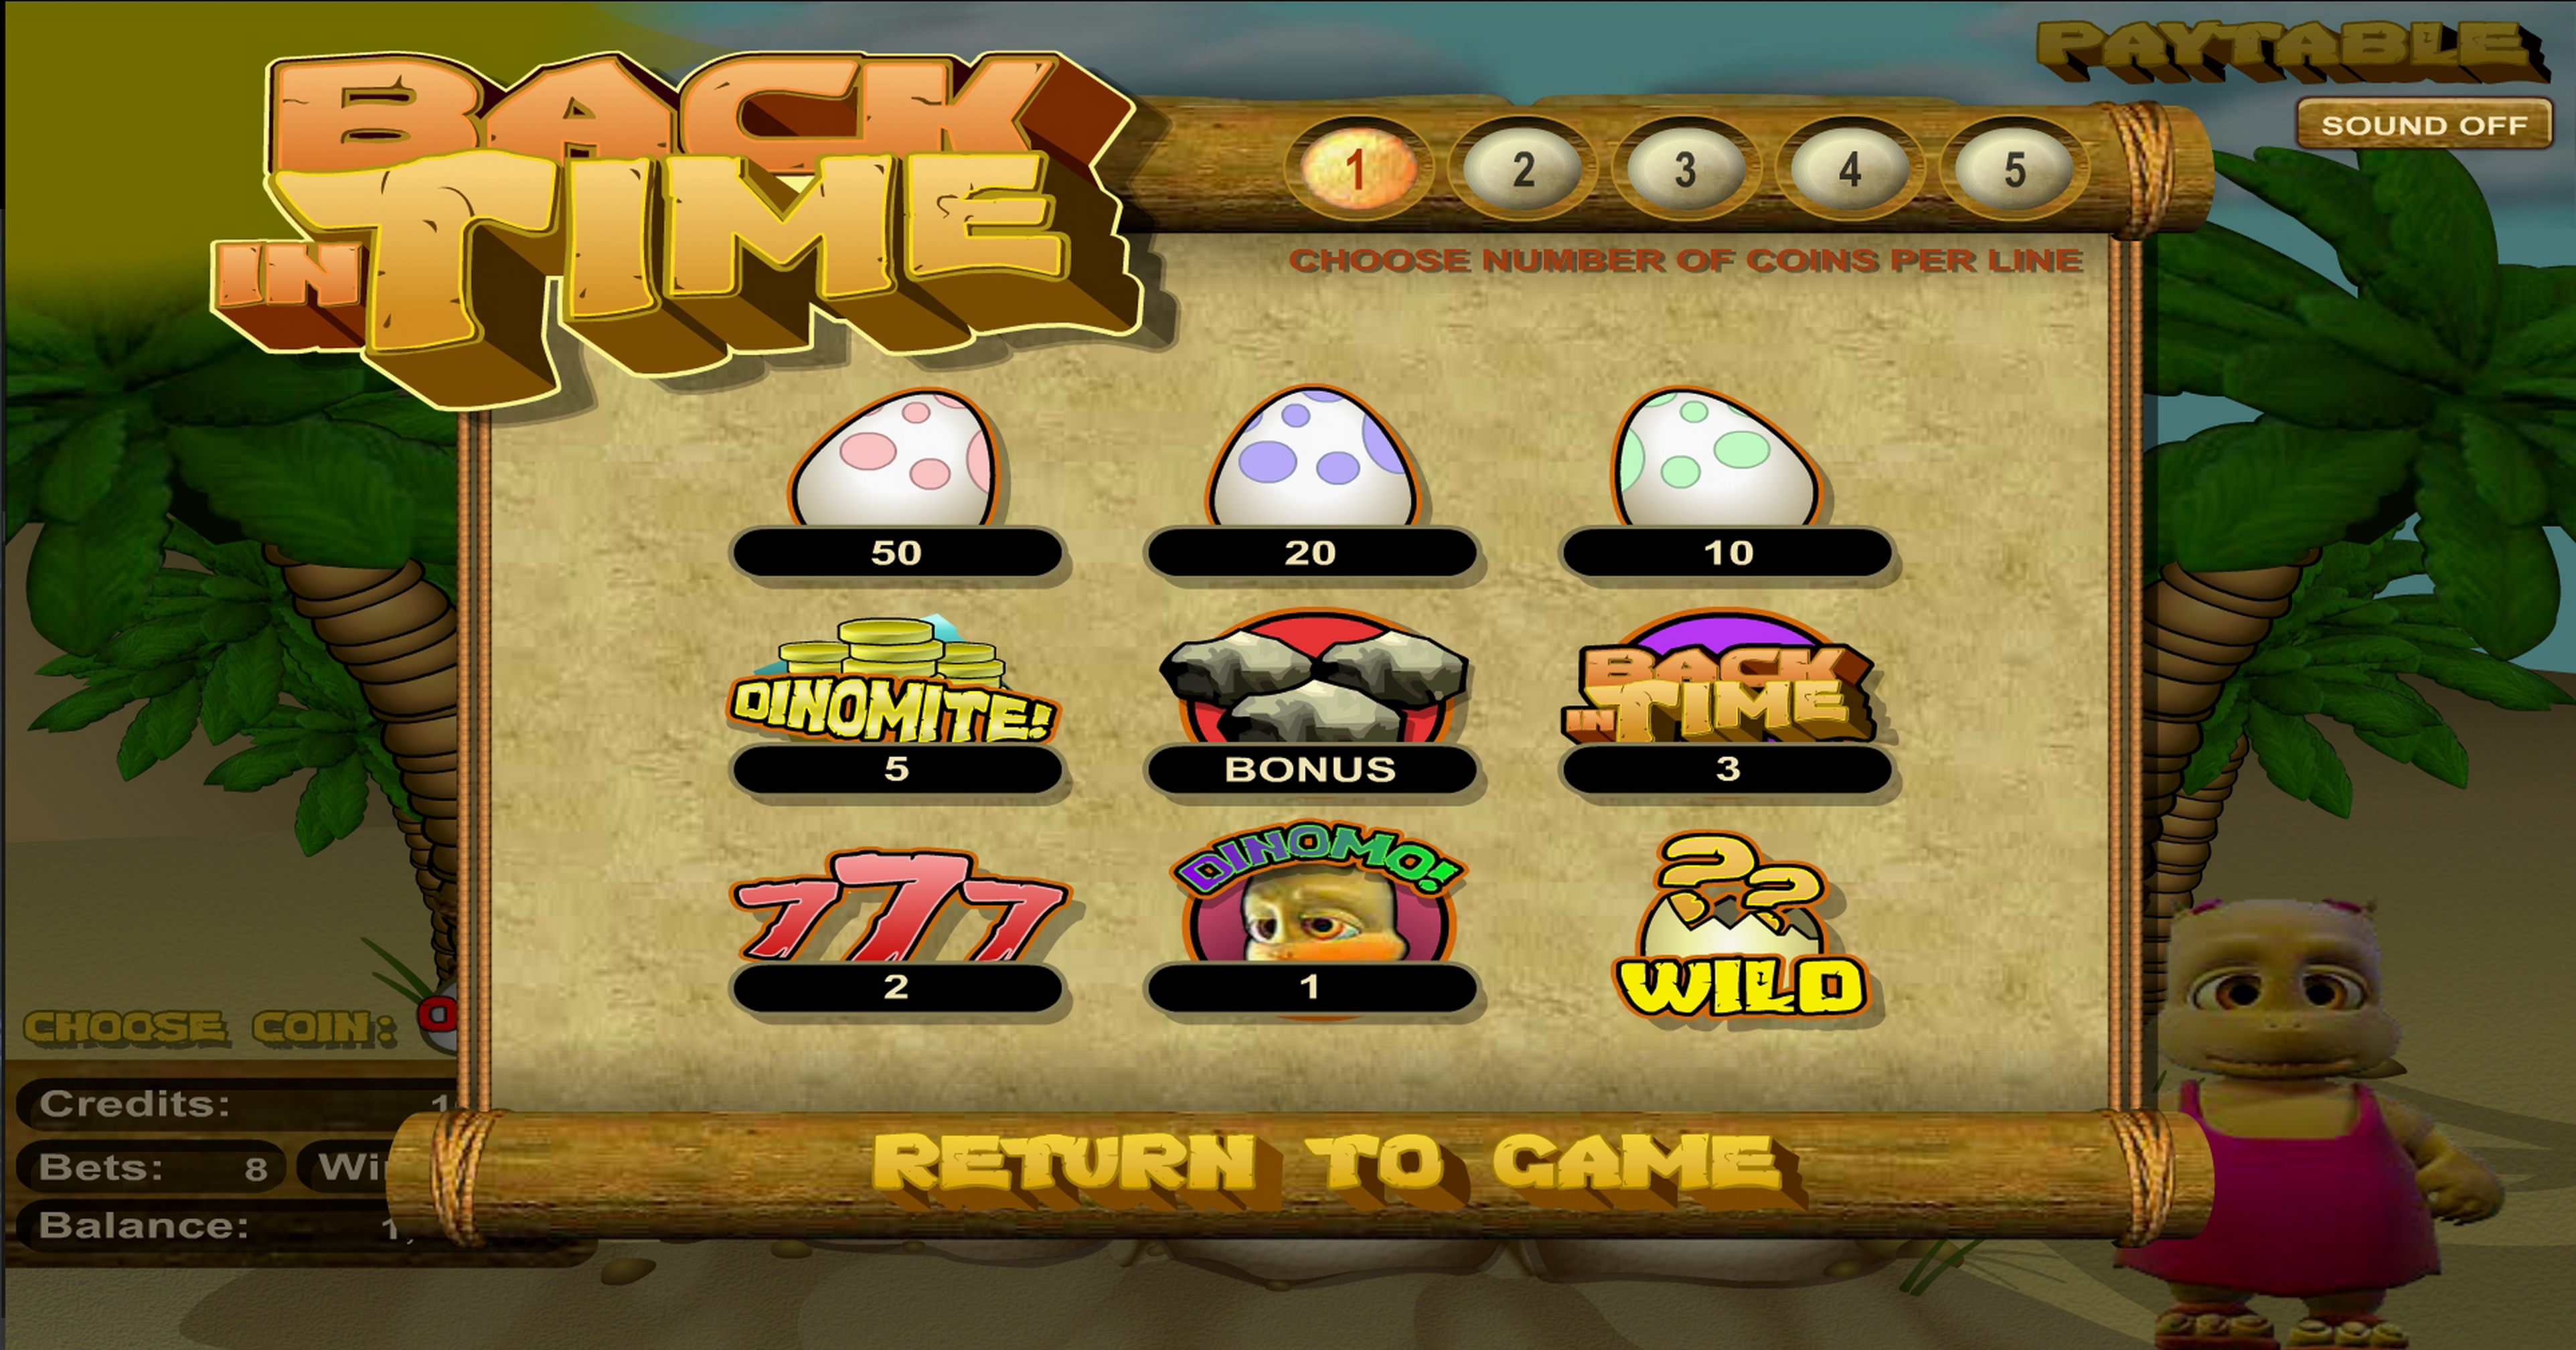 Info of Back In Time Slot Game by Betsoft